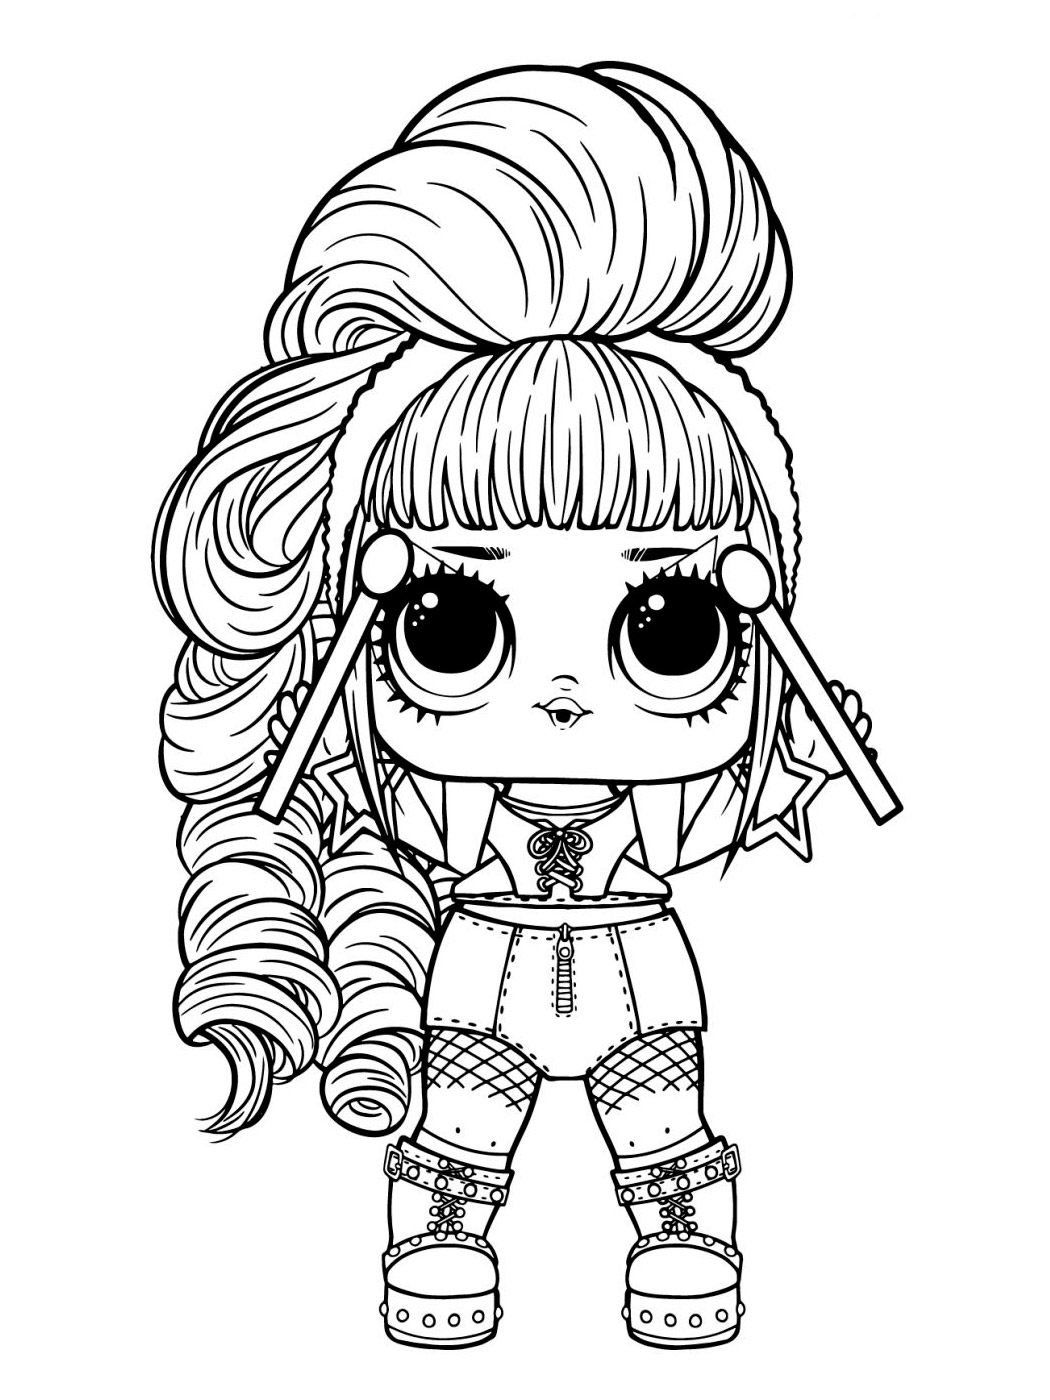 LOL Dolls Coloring Pages   Best Coloring Pages For Kids